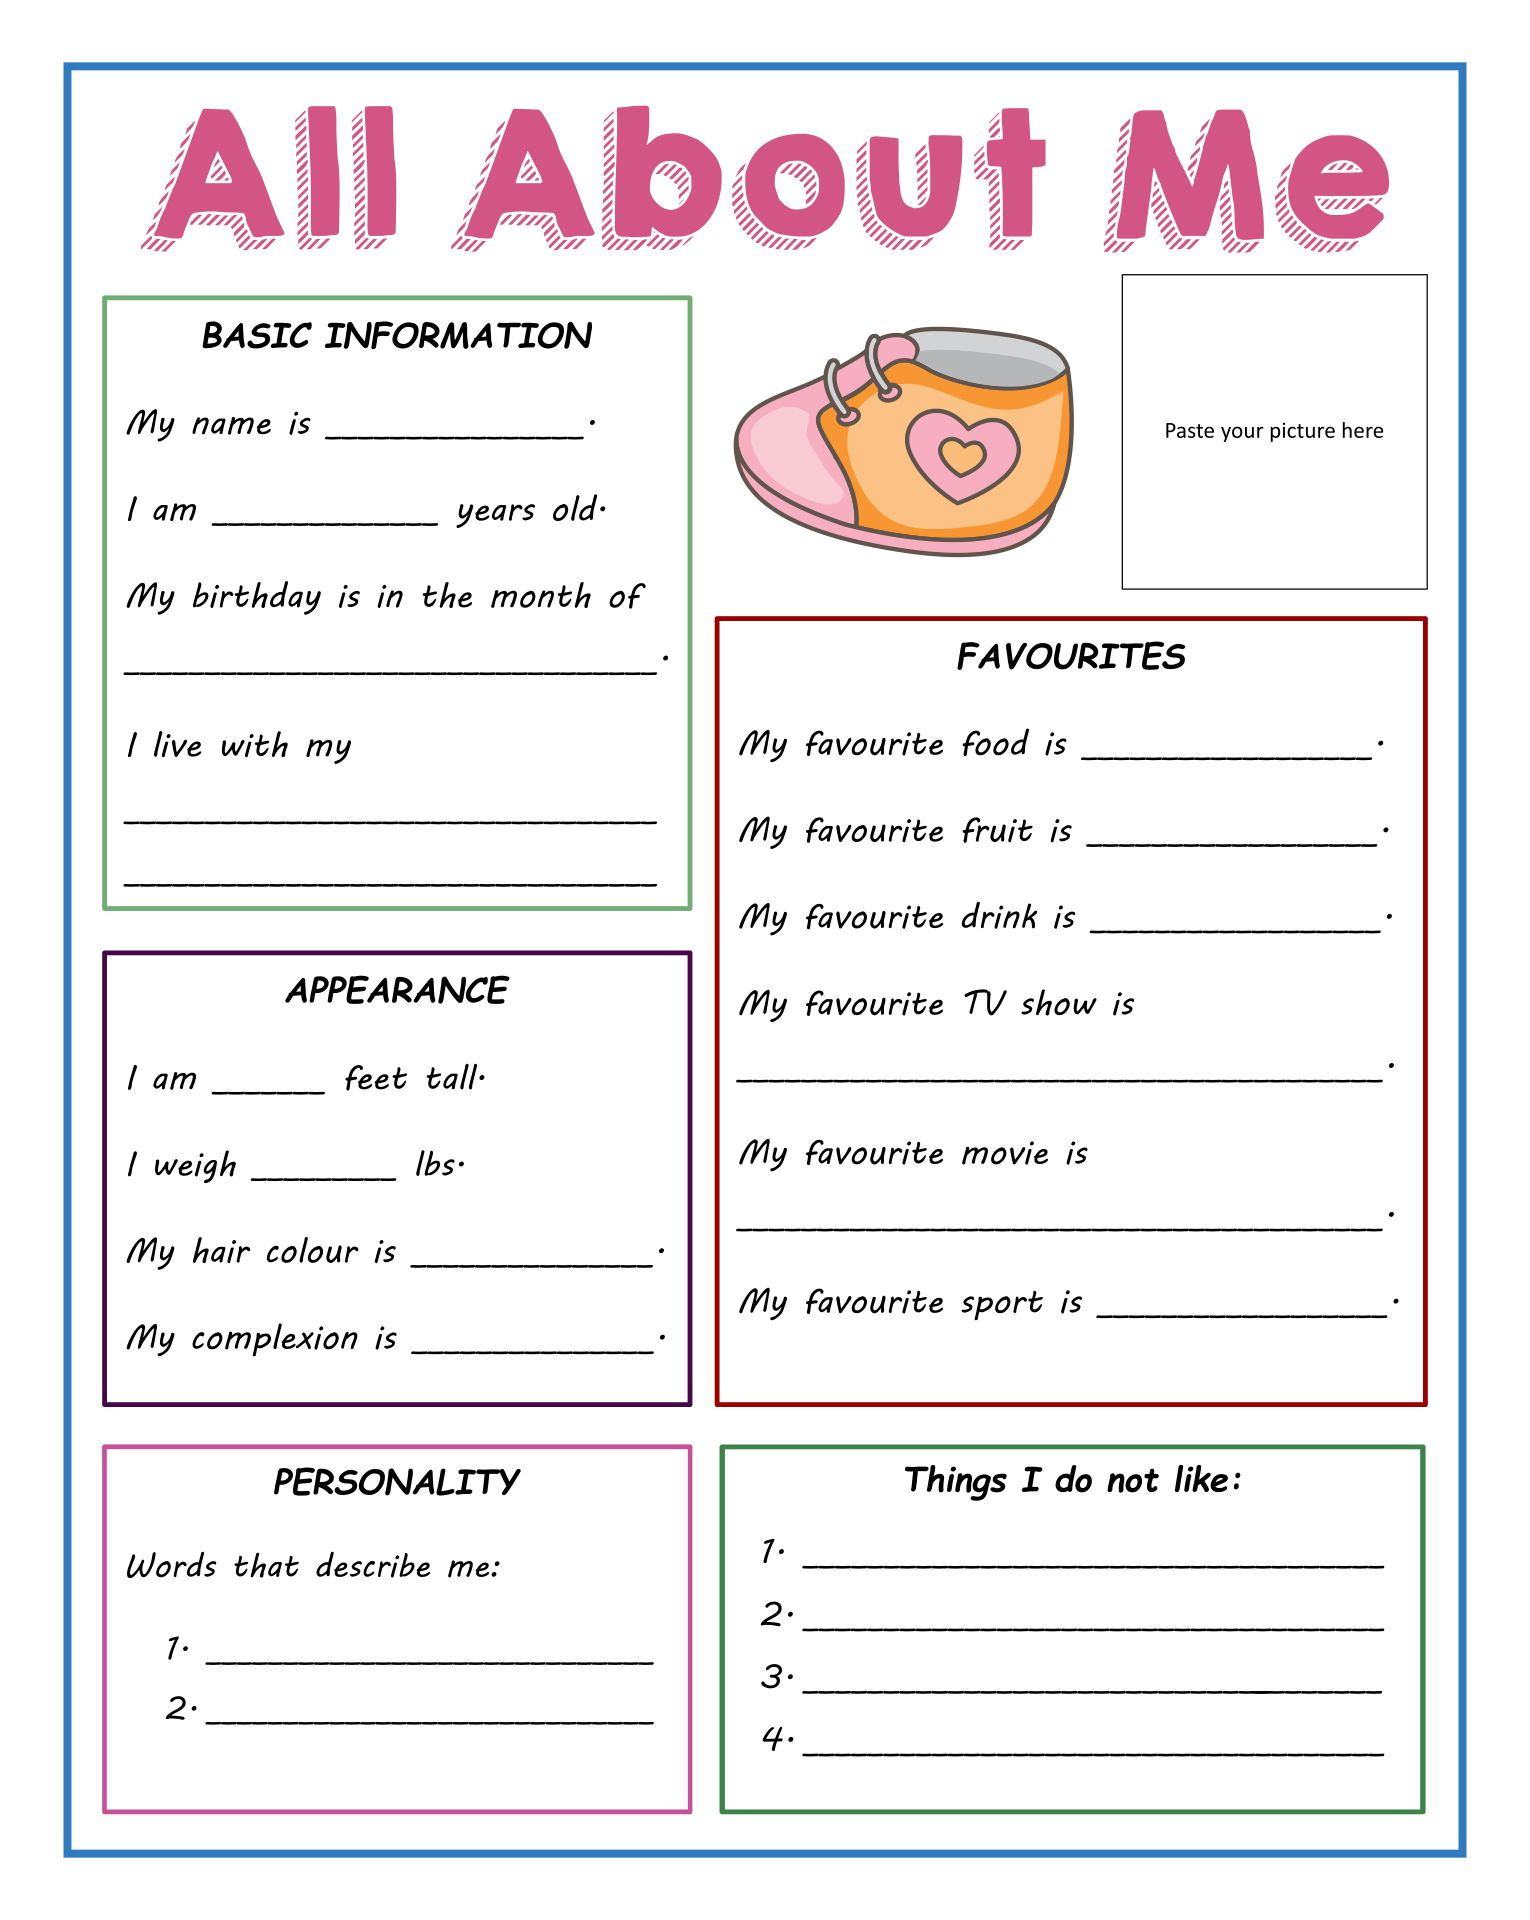 All About Me High School Printable | All About Me Worksheets